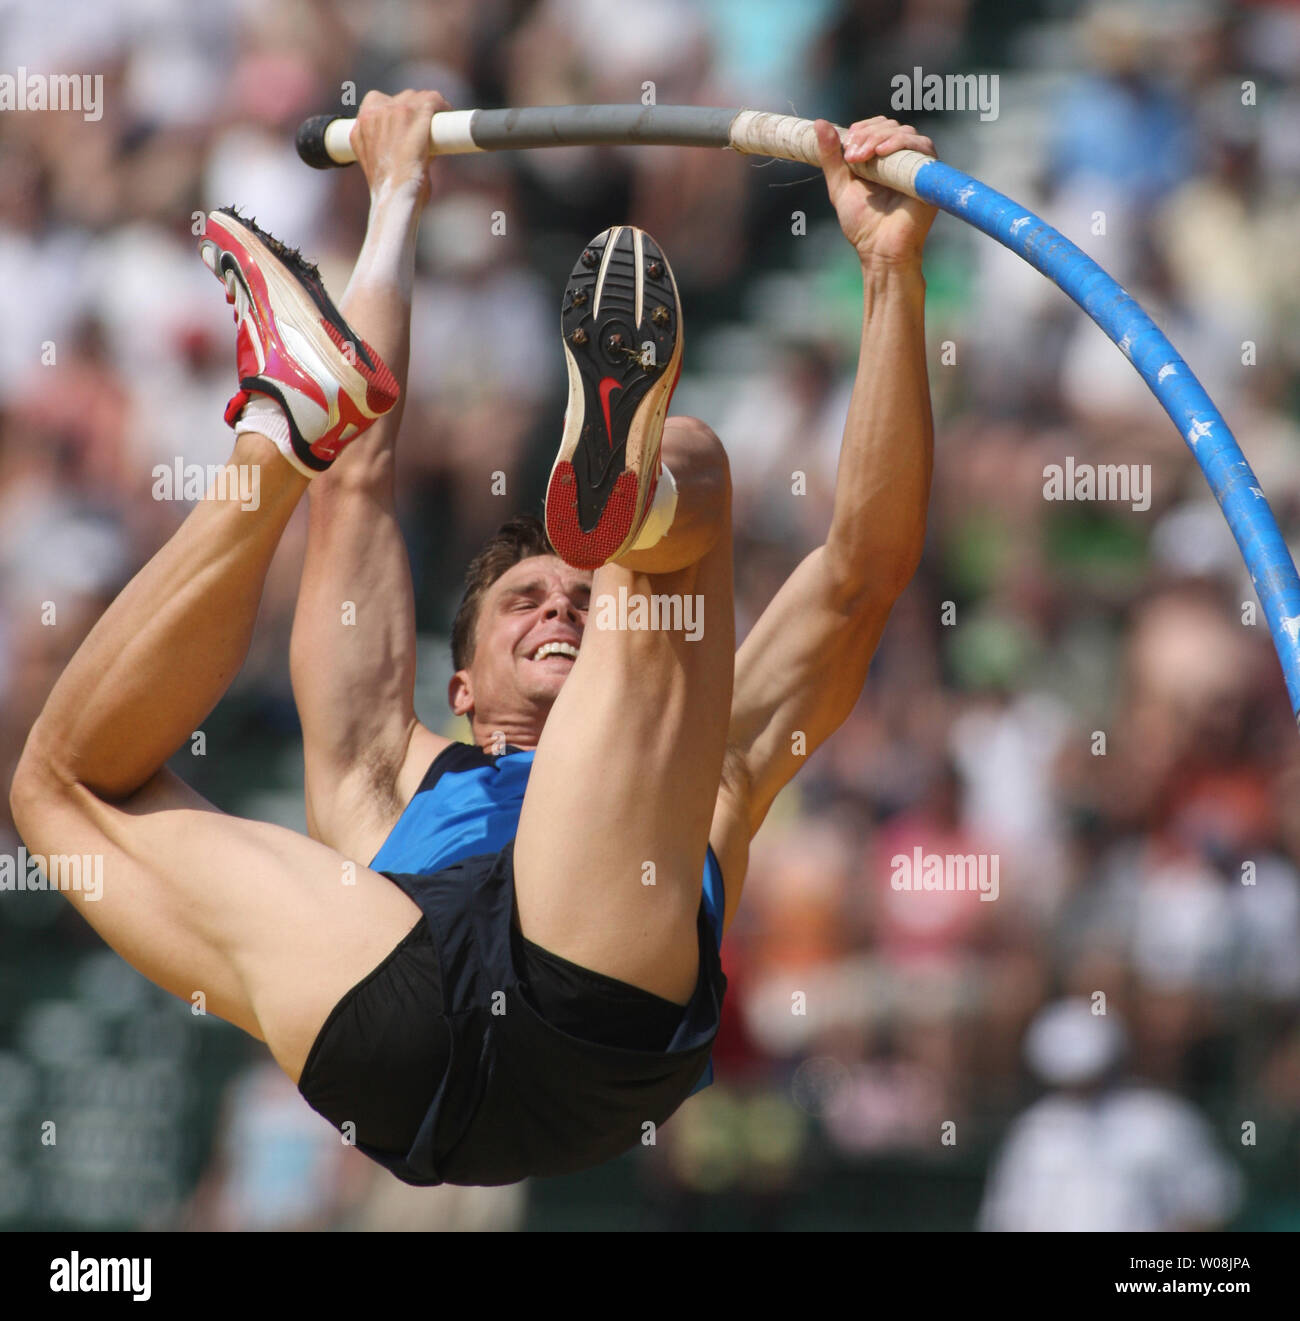 Derek Miles launches in the pole vault at the U.S. track and field Olympic trials in Eugene, Oregon on June 29, 2008. Miles cleared 5.80 meters to win and make the U.S. Olympic team.   (UPI Photo/Terry Schmitt) Stock Photo